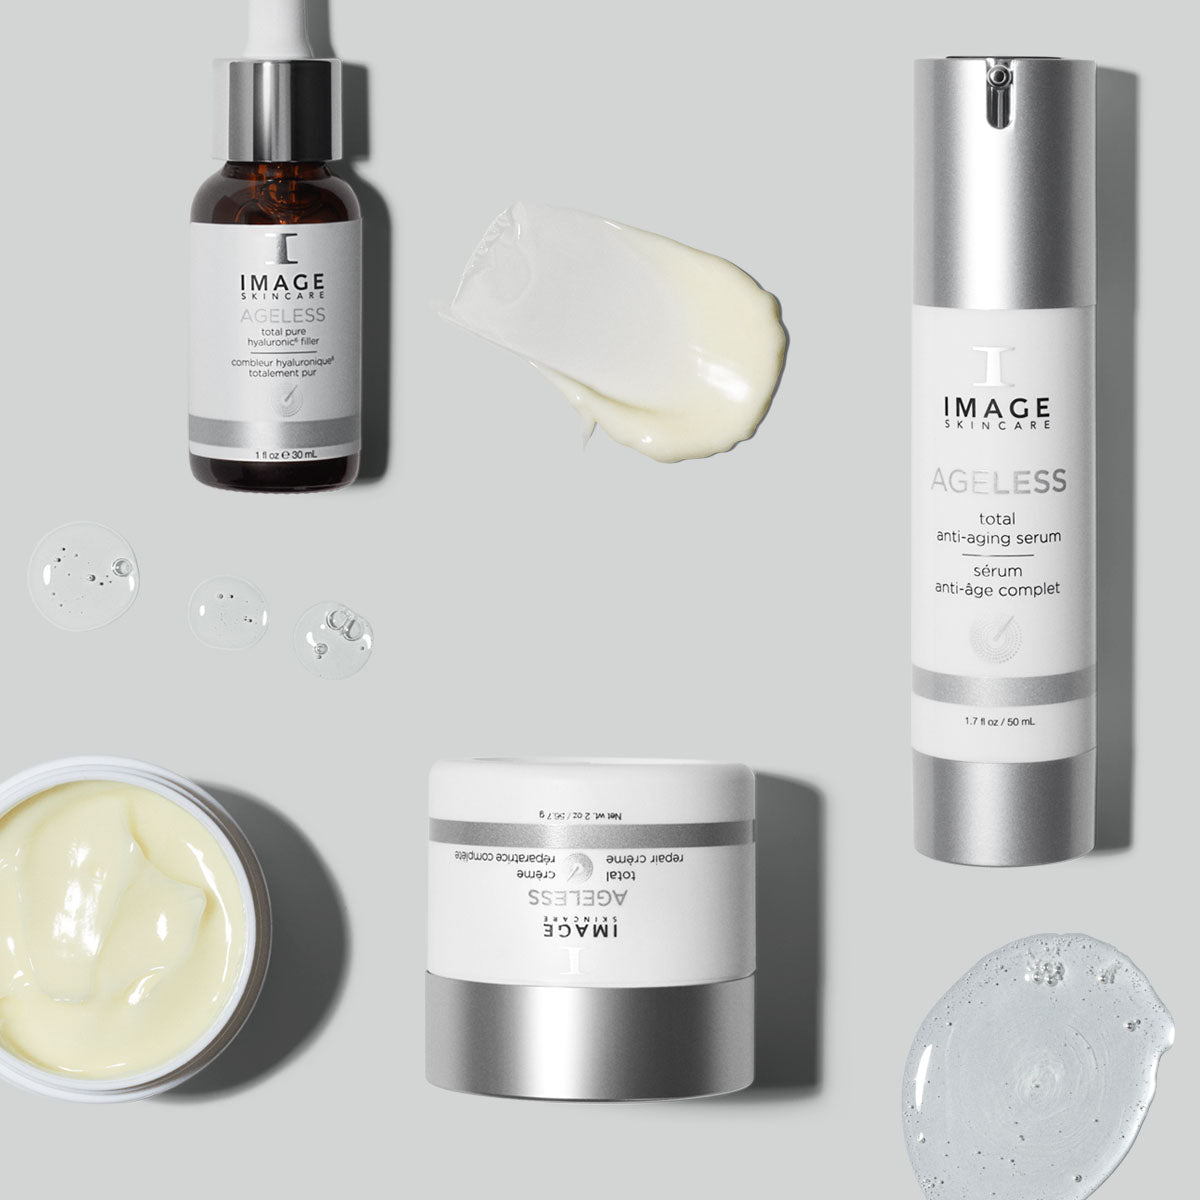 IMAGE Skincare collection of AGELESS Skincare Products made for anti-aging benefits.